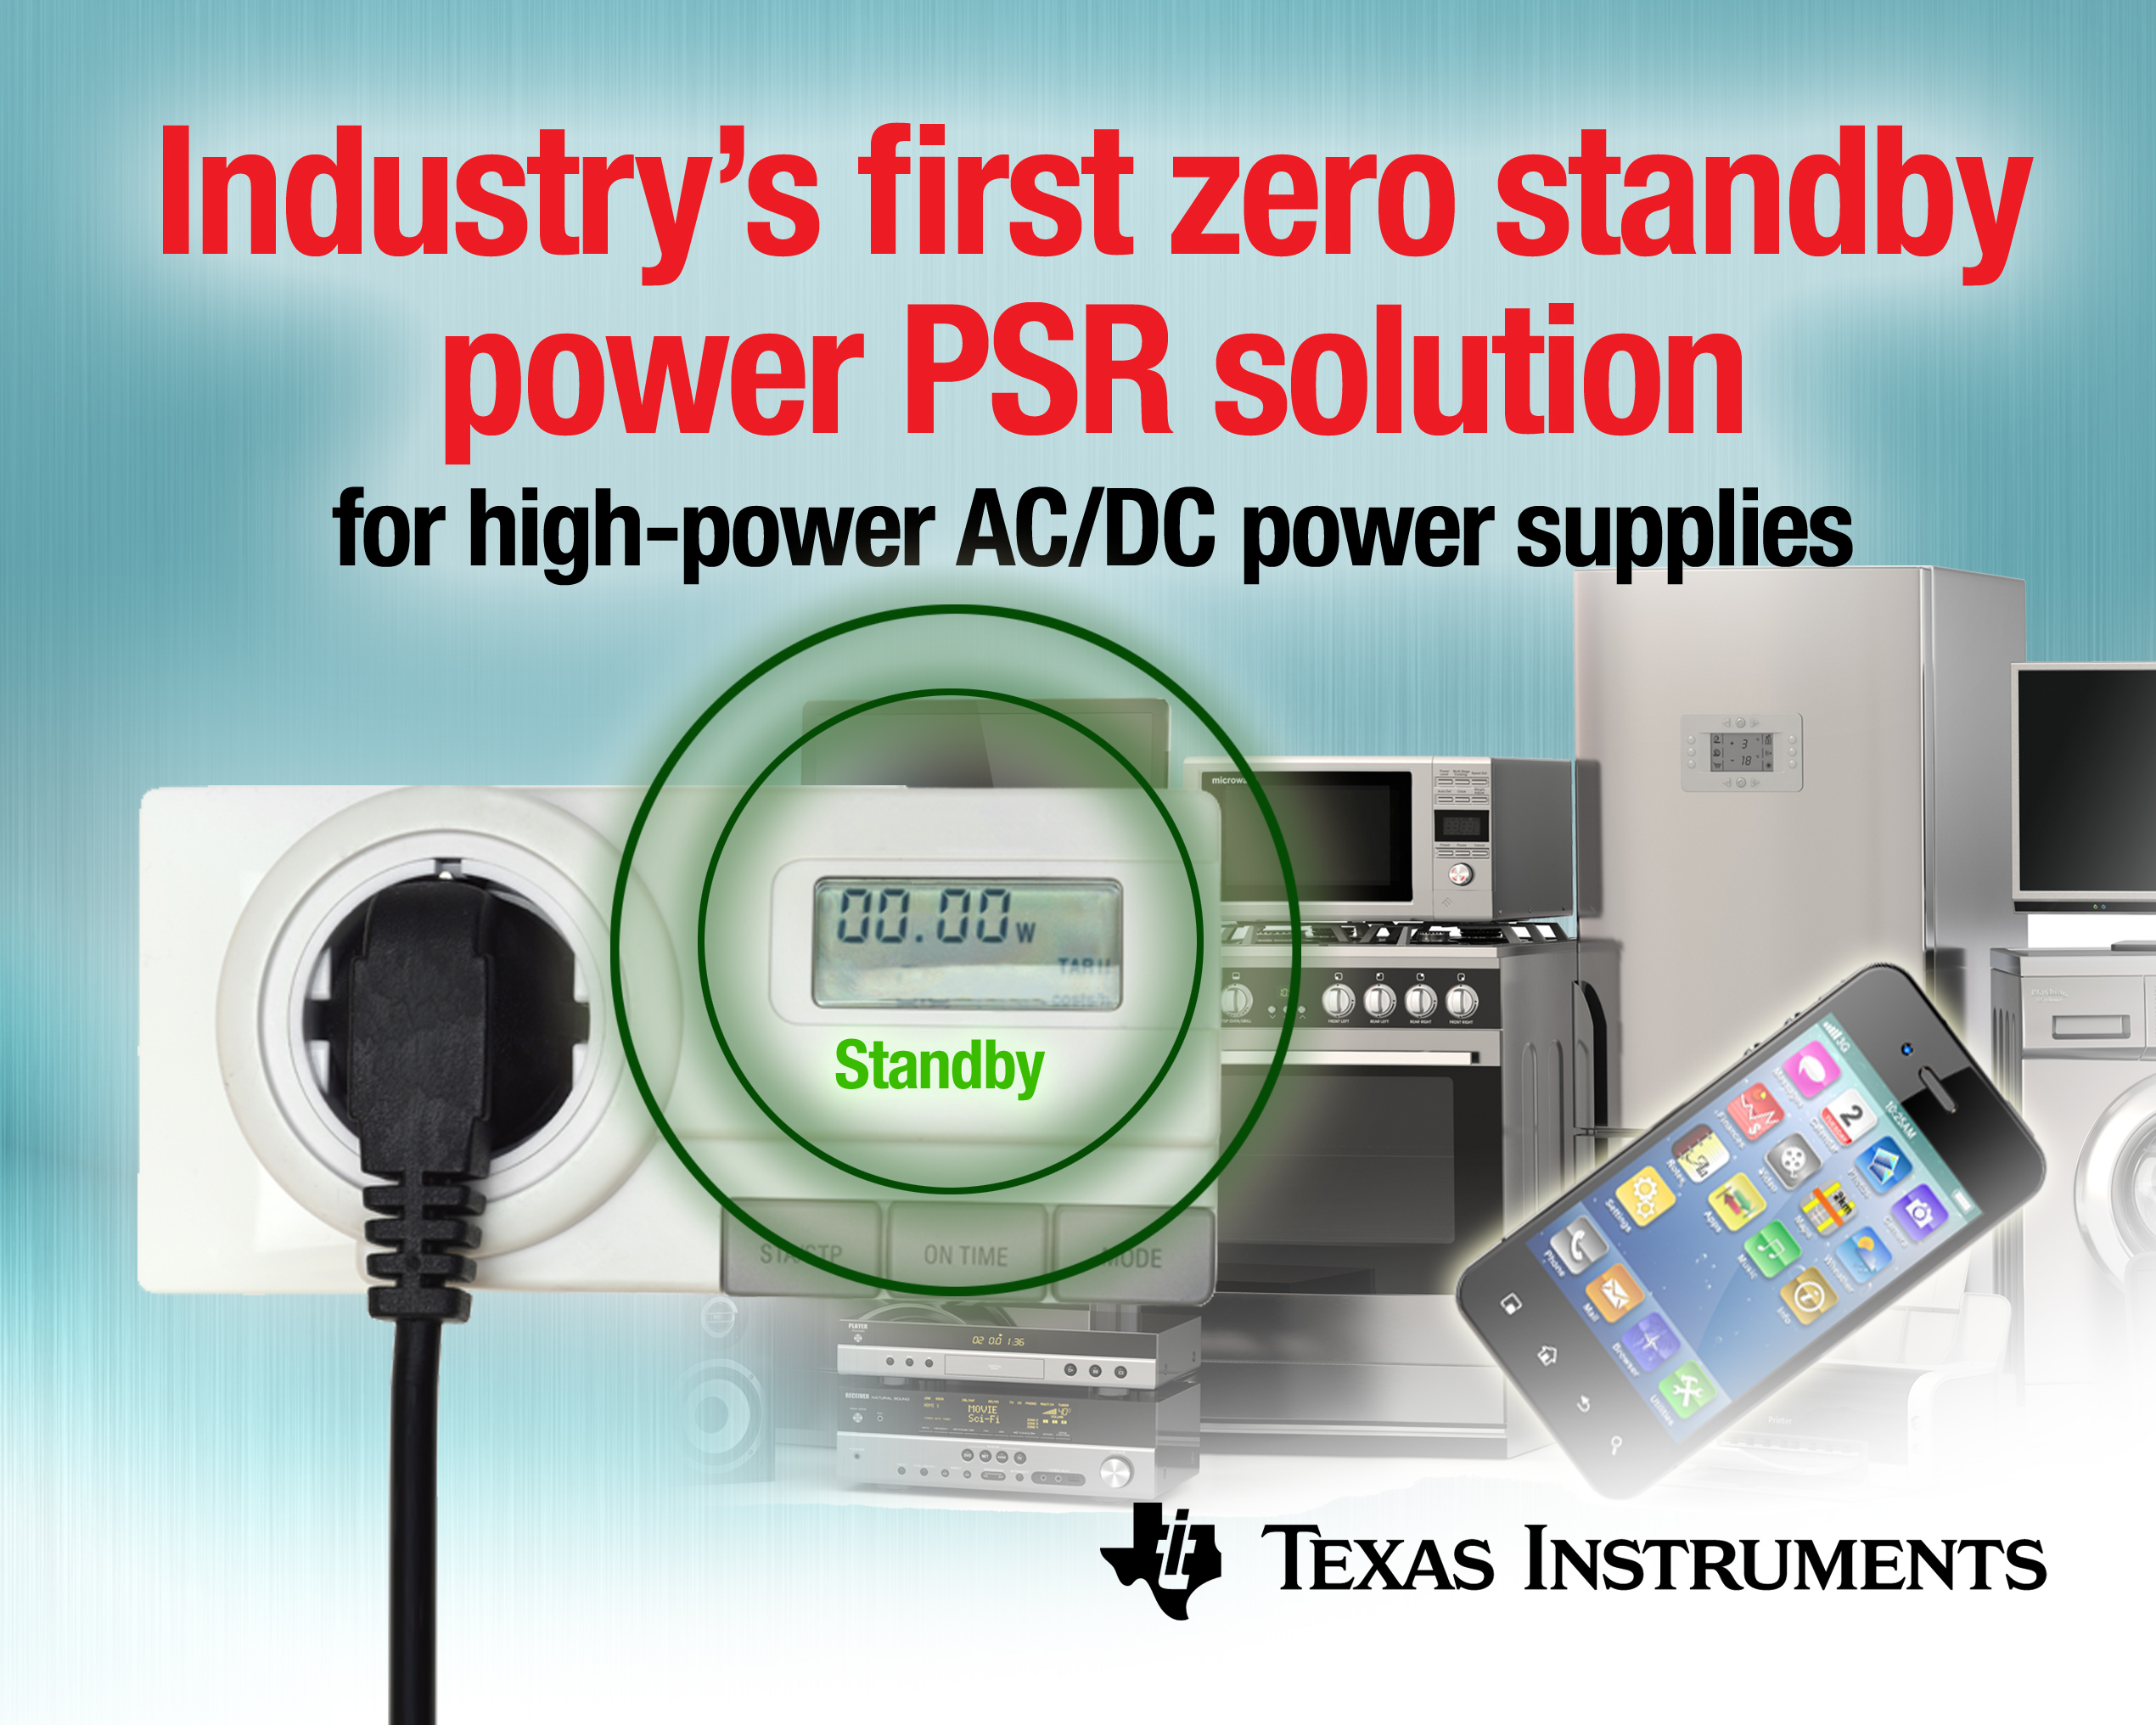 TI claims first zero standby power PSR solution for high-power AC/DC power supplies